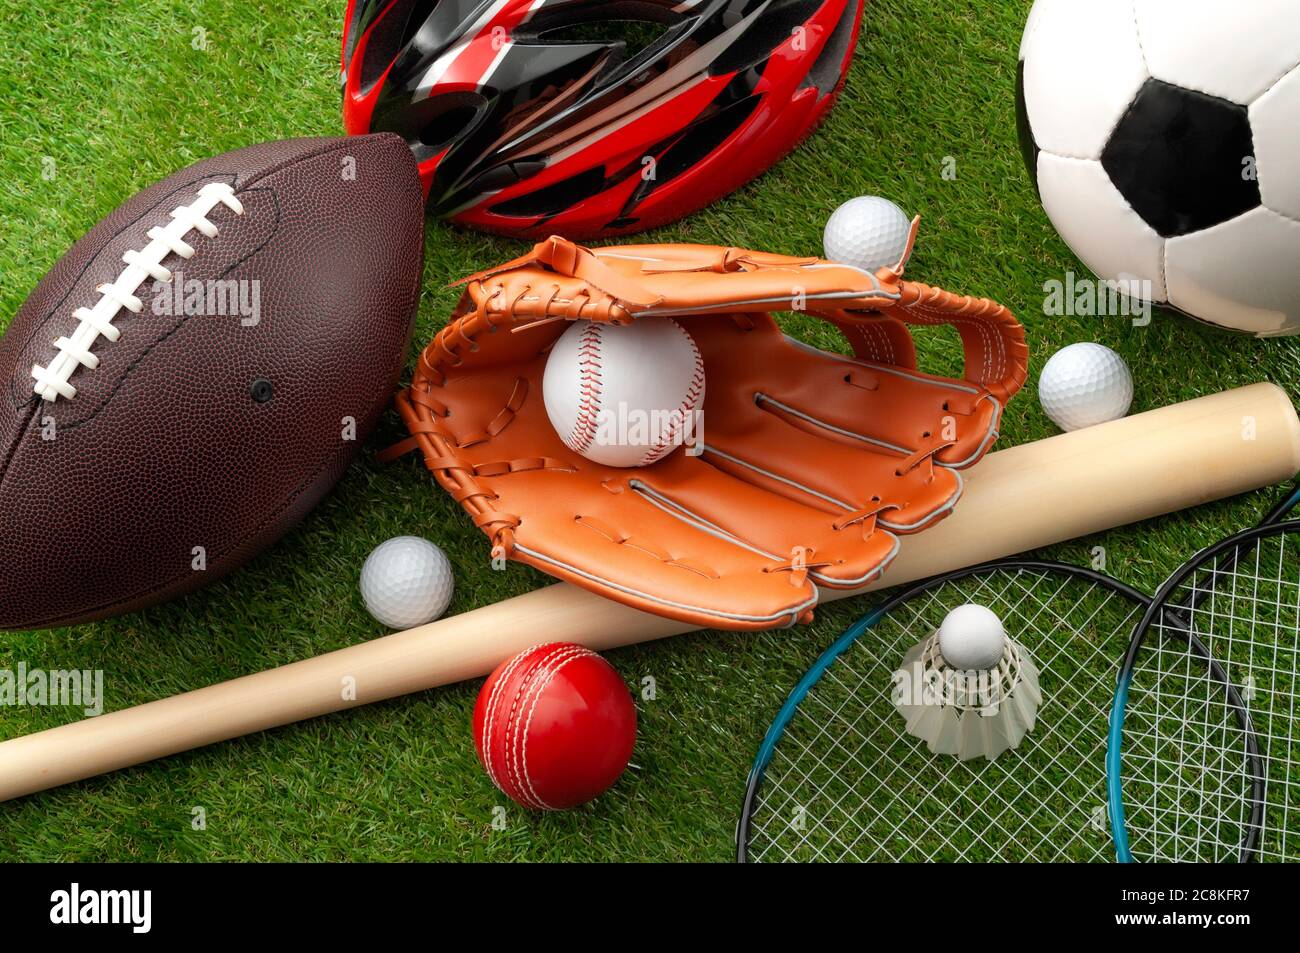 Sports shop, youth athletics and team sport competition conceptual idea with various types balls (soccer, baseball, football, golf ball), wooden bat a Stock Photo